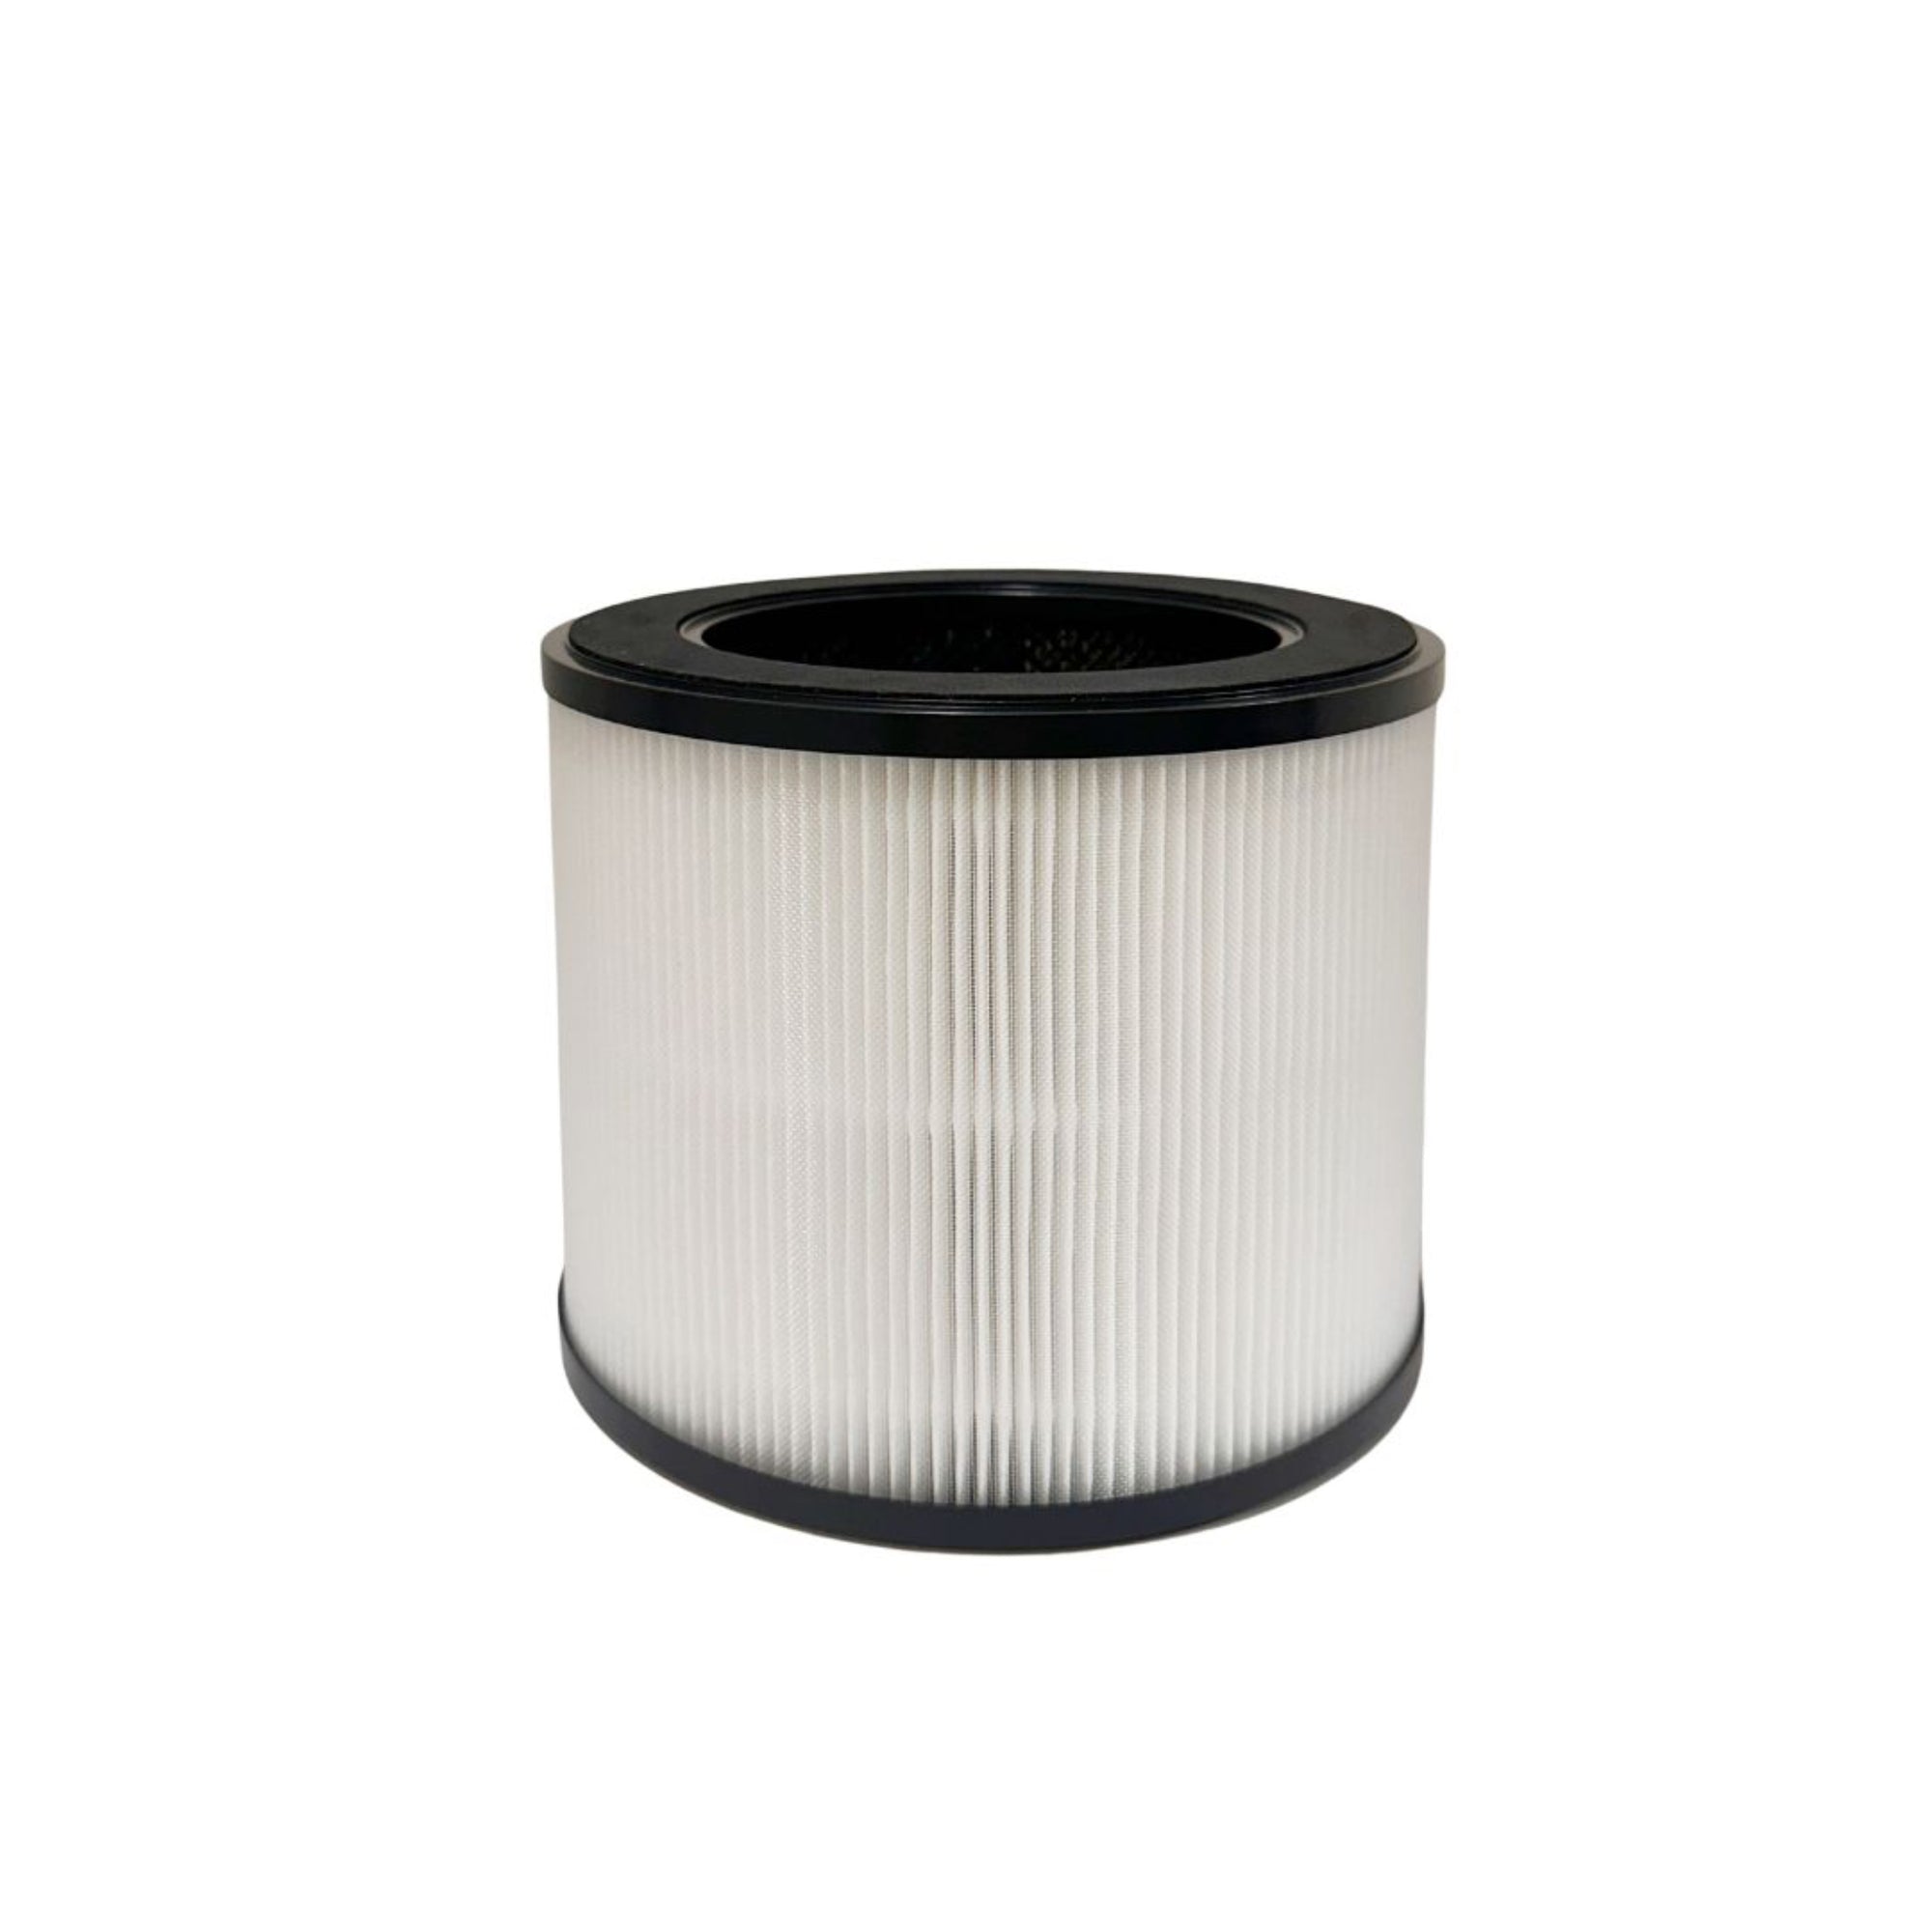 Nispira MA-22 True HEPA Replacement Filter | 3 in 1 with Pre-filter | Compatible with Medify MA Series 22 Air Purifier